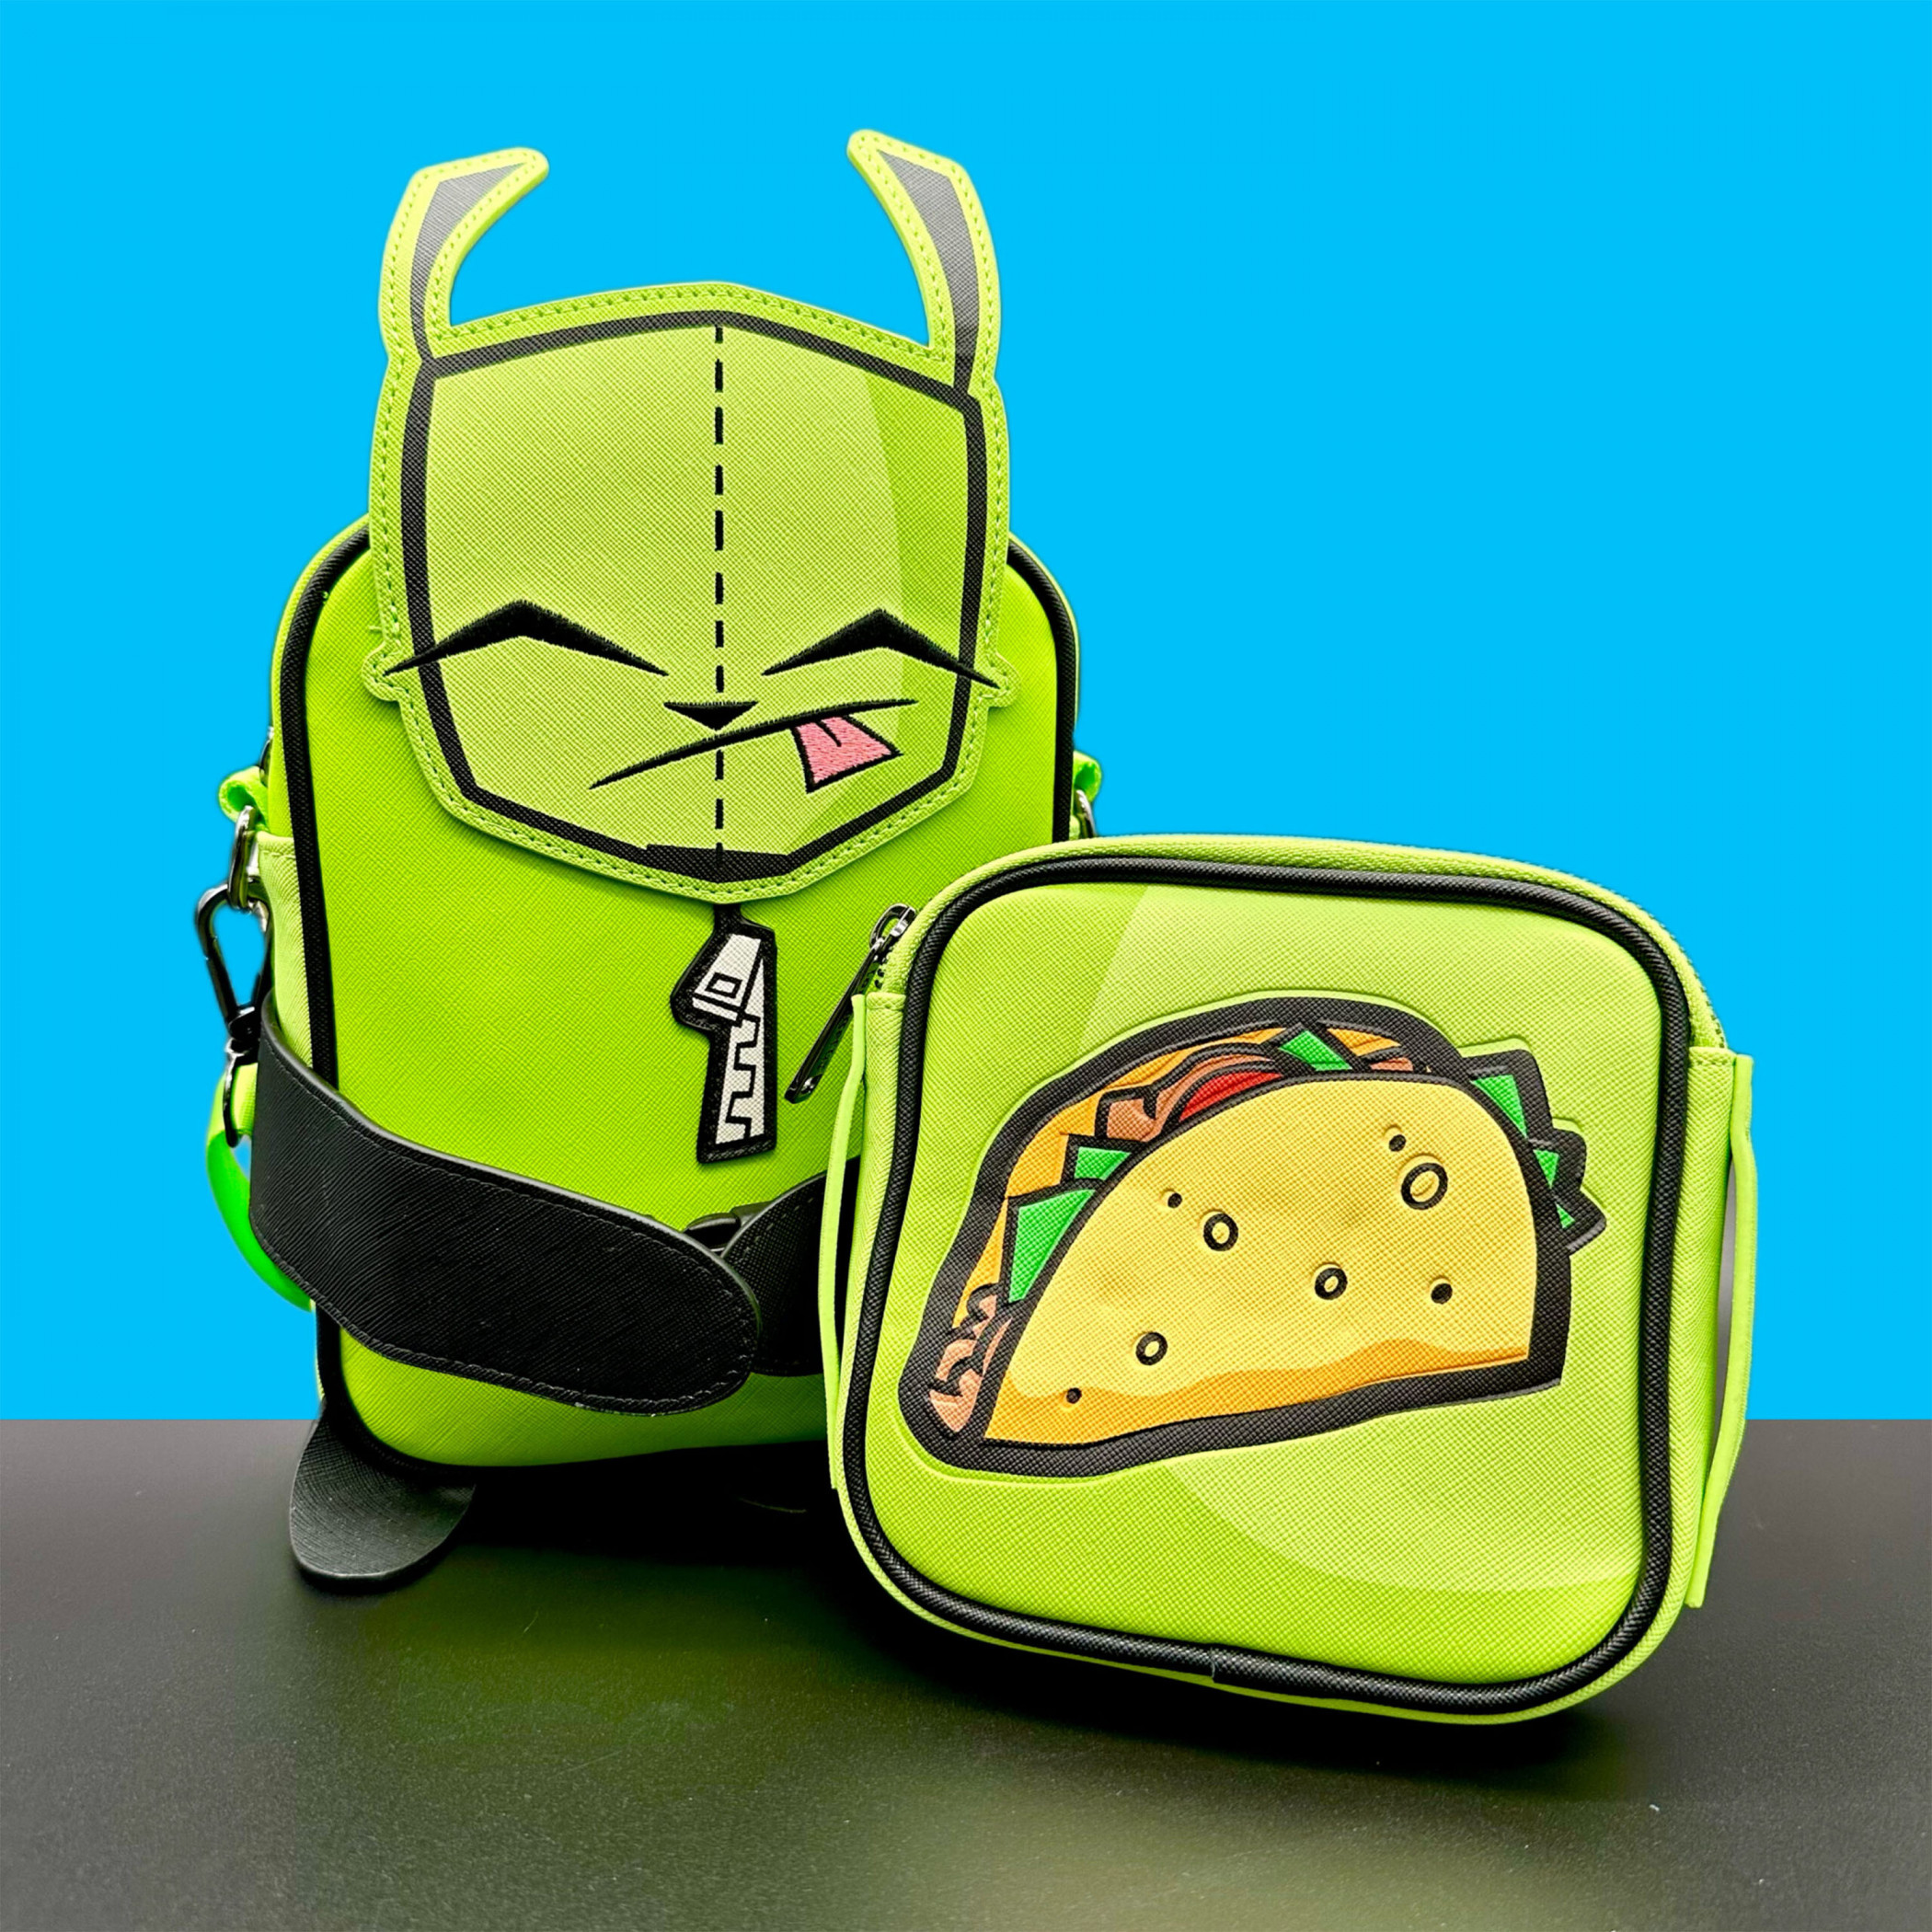 Invader Zim Gir and Tacos Crossbody Bag by Loungefly